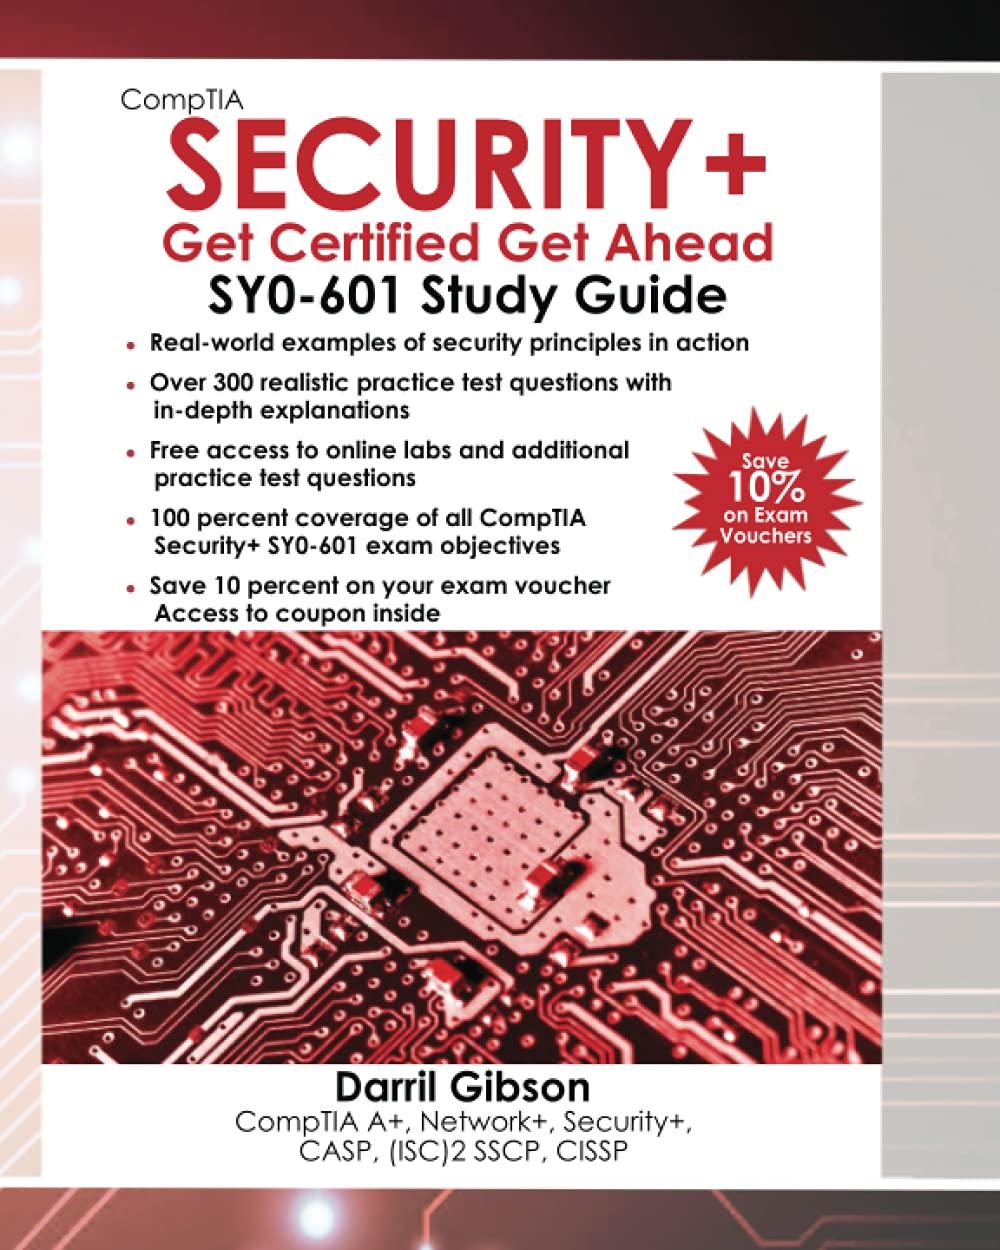 CompTIA Security+ Get Certified Get Ahead: SY0-601 Study Guide by Darril Gibson 